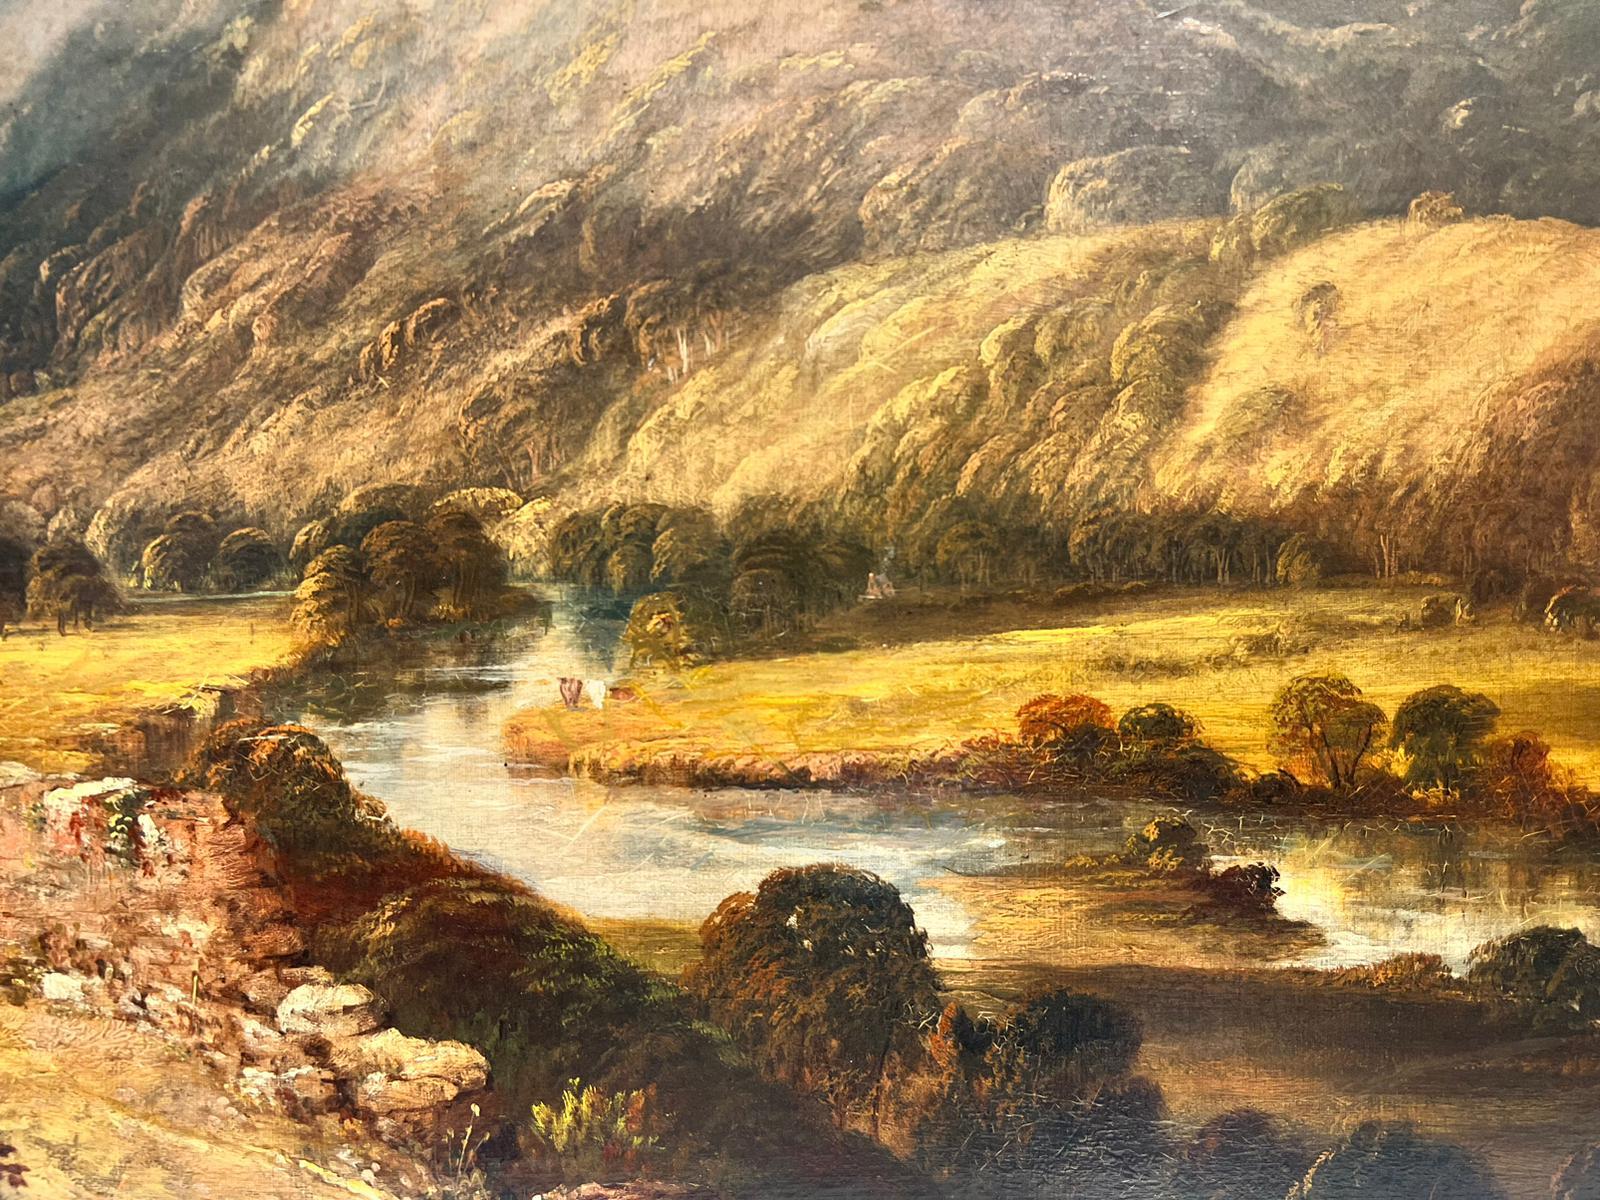 Artist/ School: Scottish School, early 19th century

Title: The Highland Valley

Medium: oil on canvas, unframed

Painting: 28 x 36 inches

Provenance: private collection, UK

Condition: The painting is in overall very good and sound condition.
 